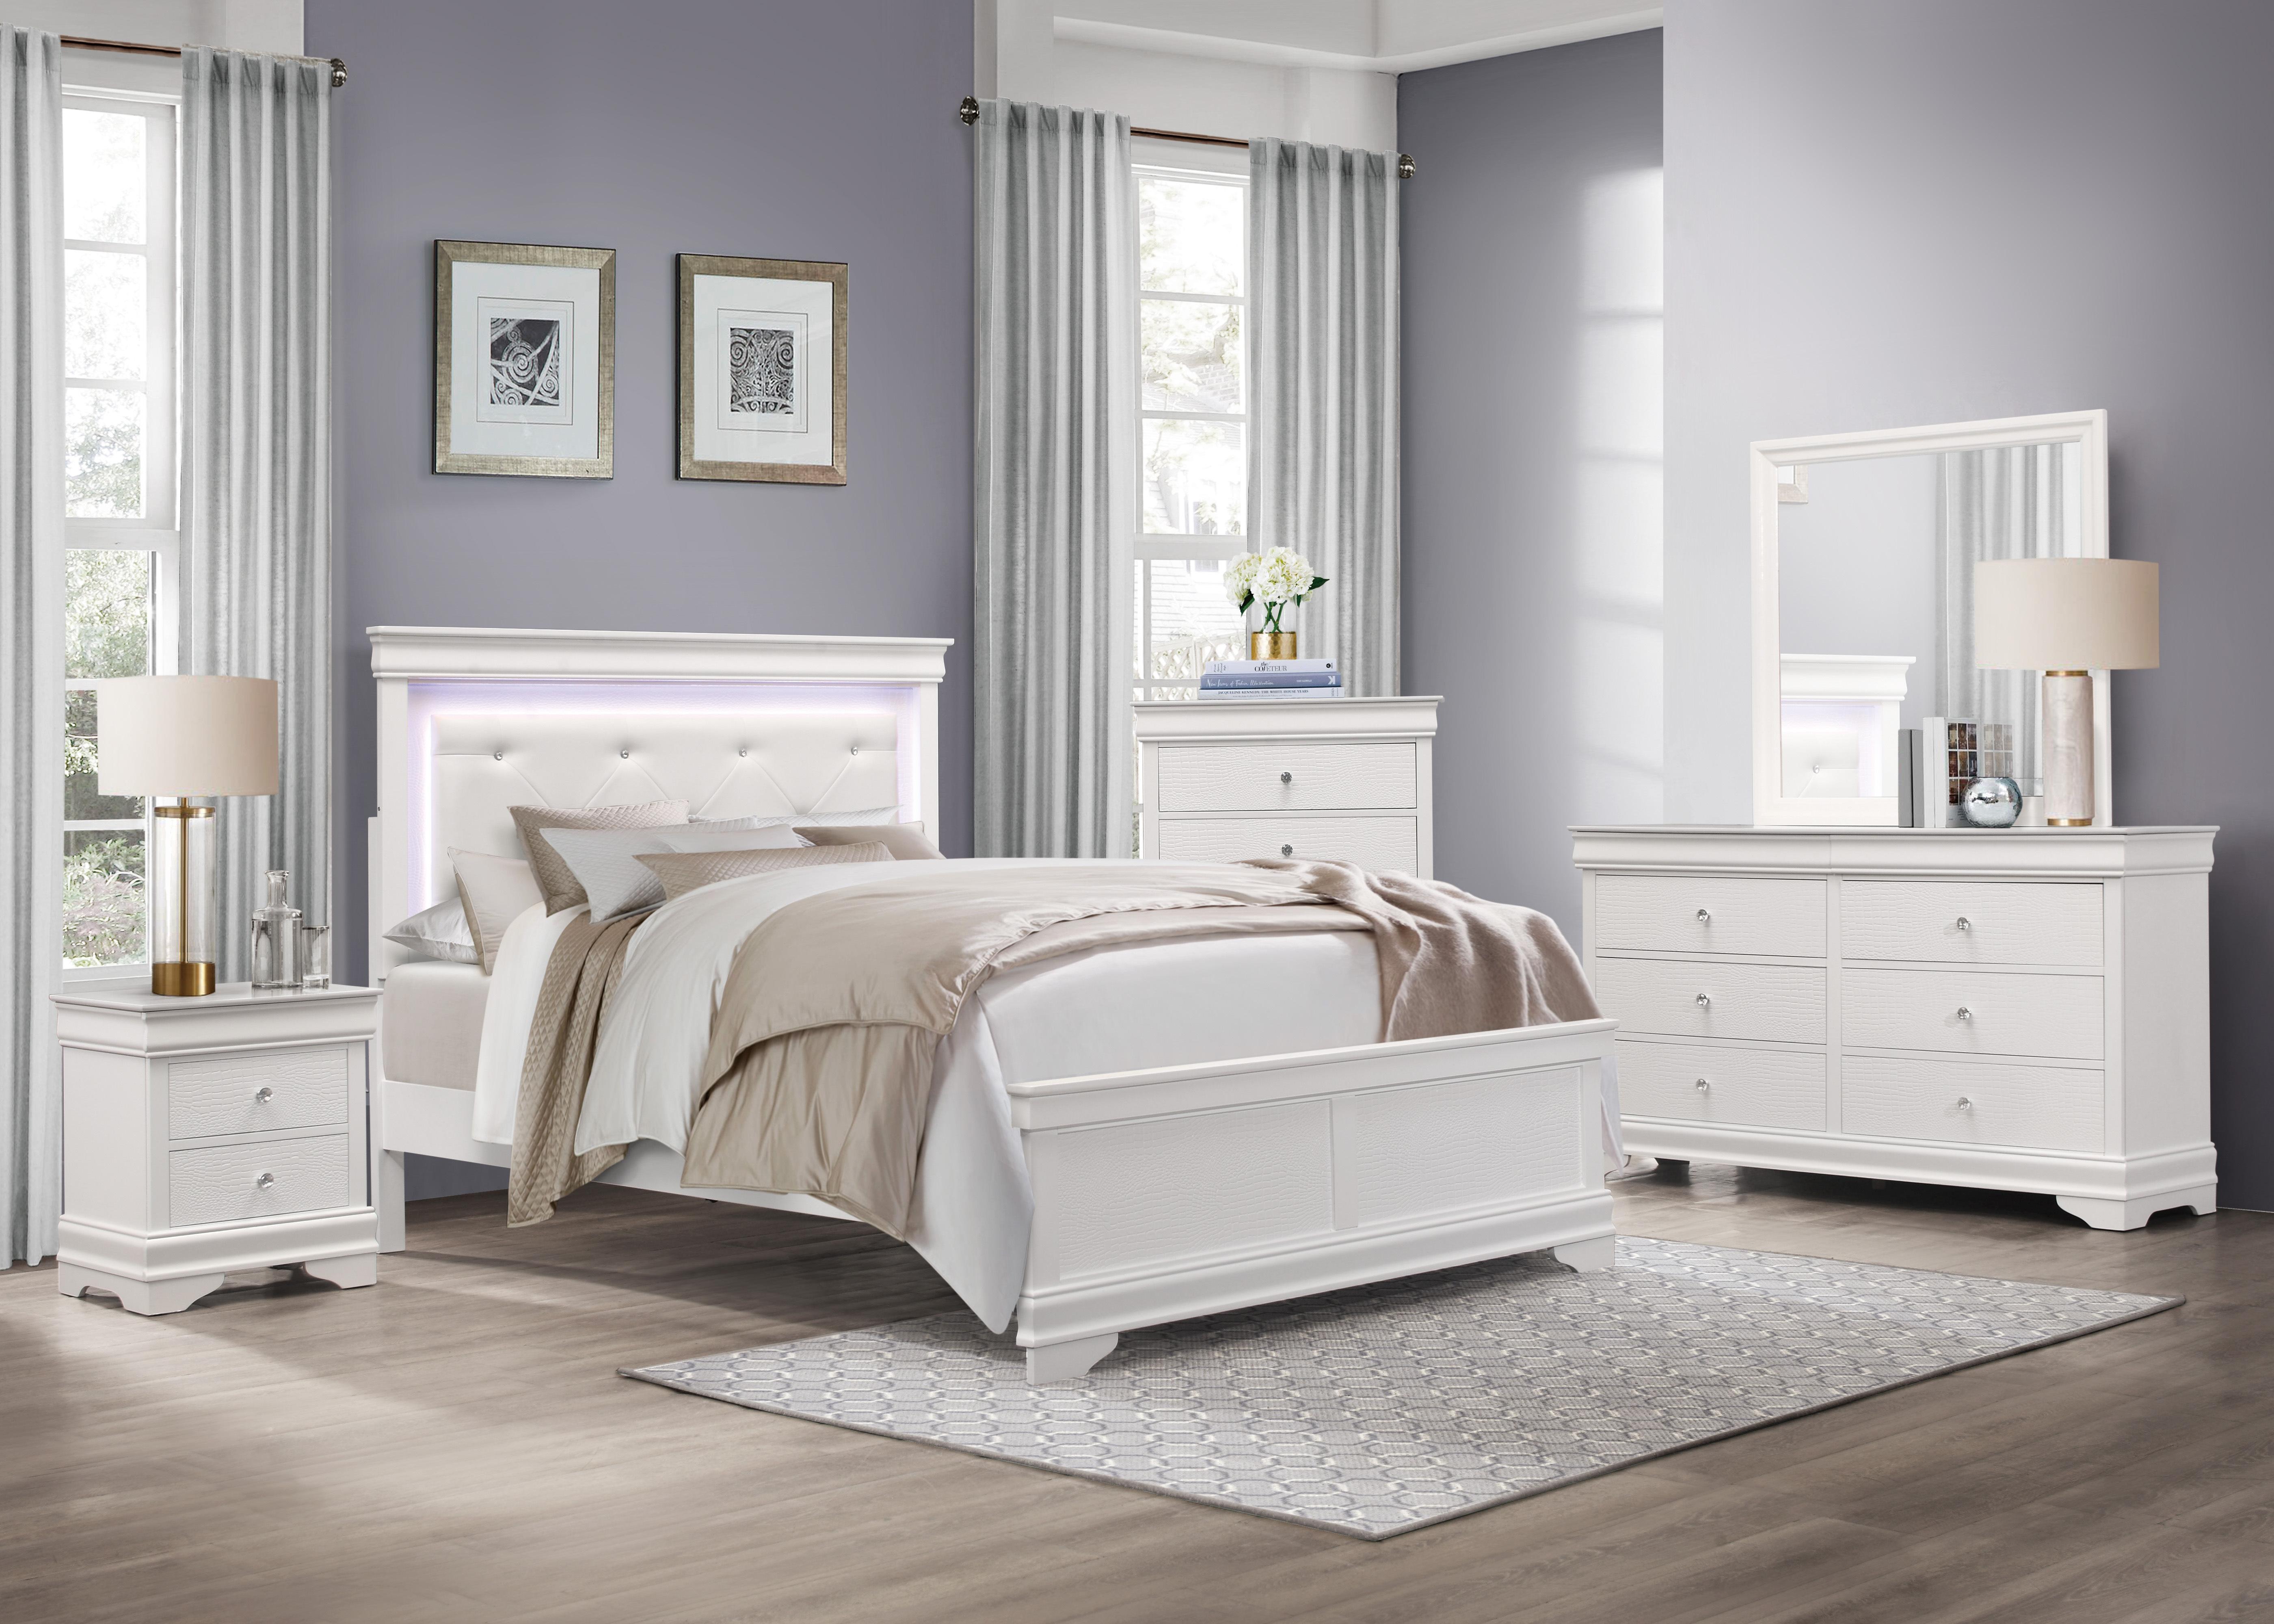 

    
Traditional White Wood Queen Bedroom Set 6pcs Homelegance 1556W-1* Lana
